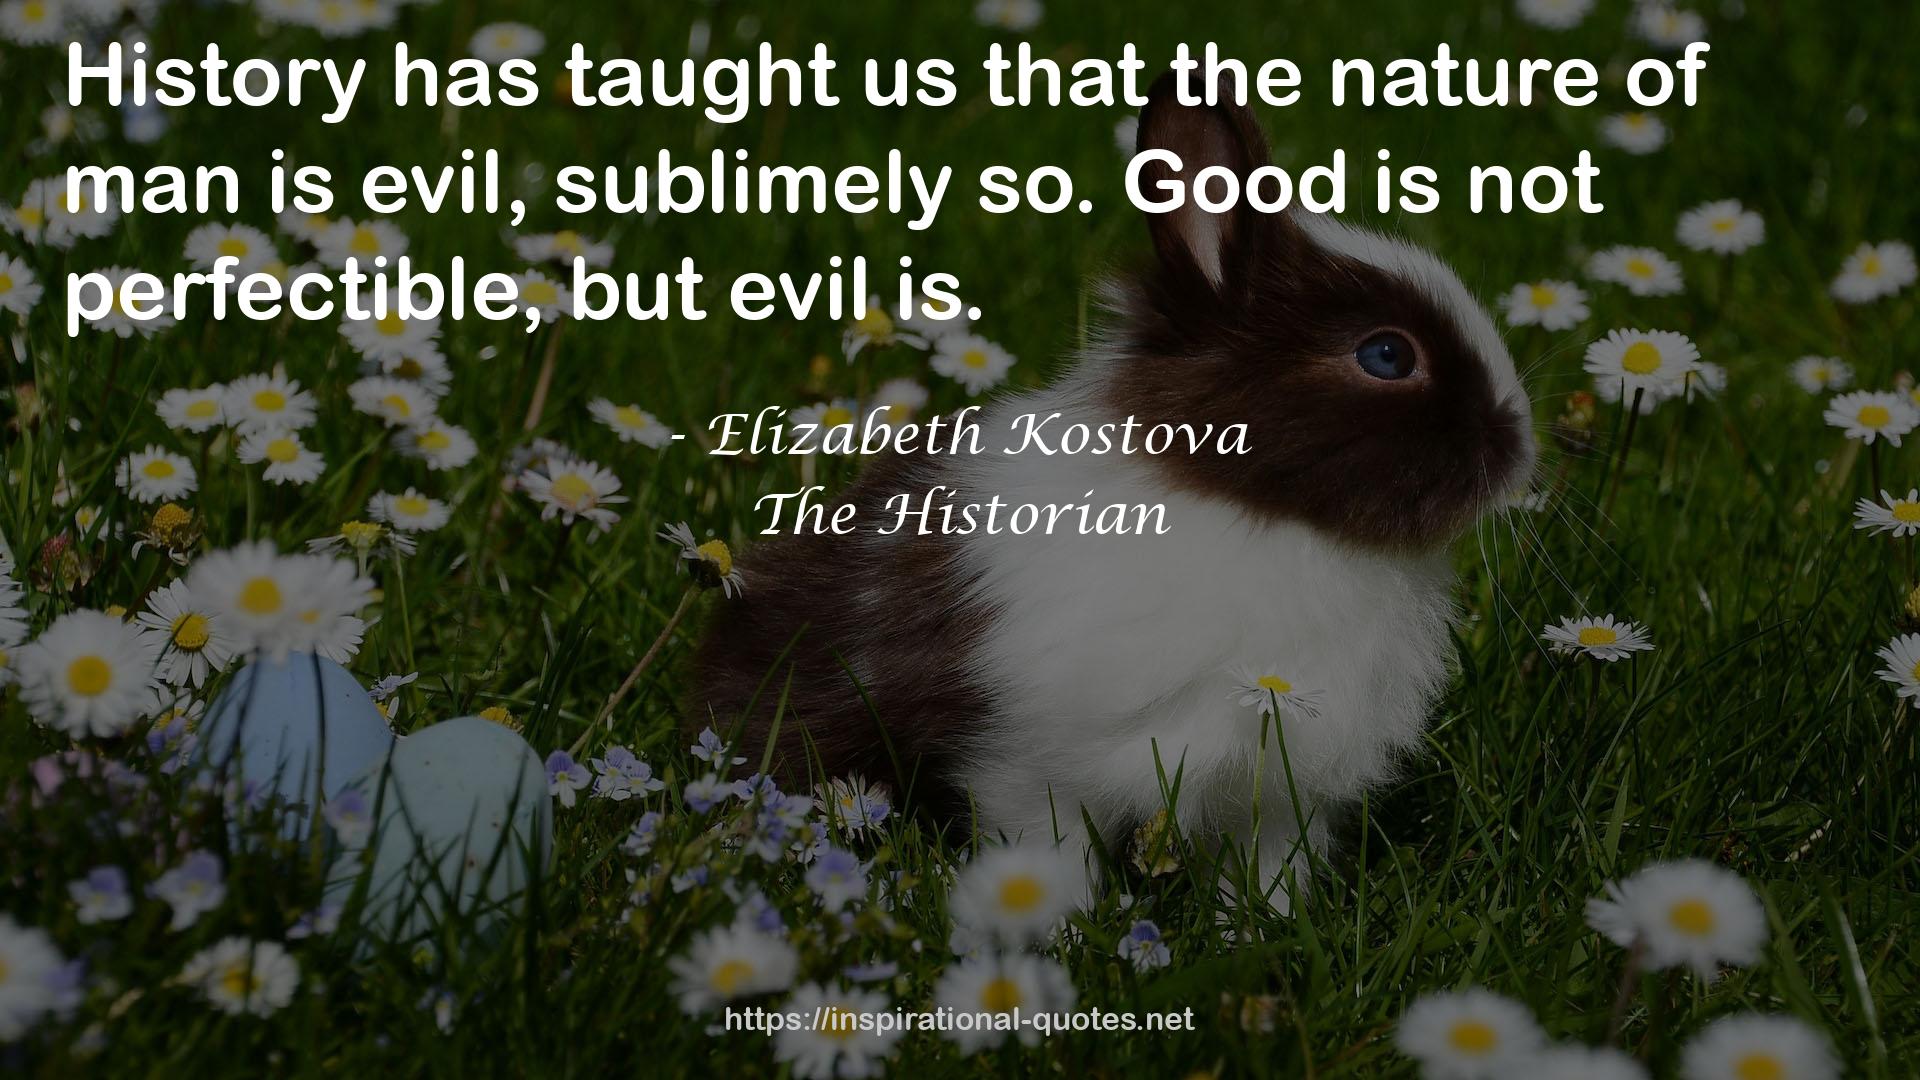 The Historian QUOTES